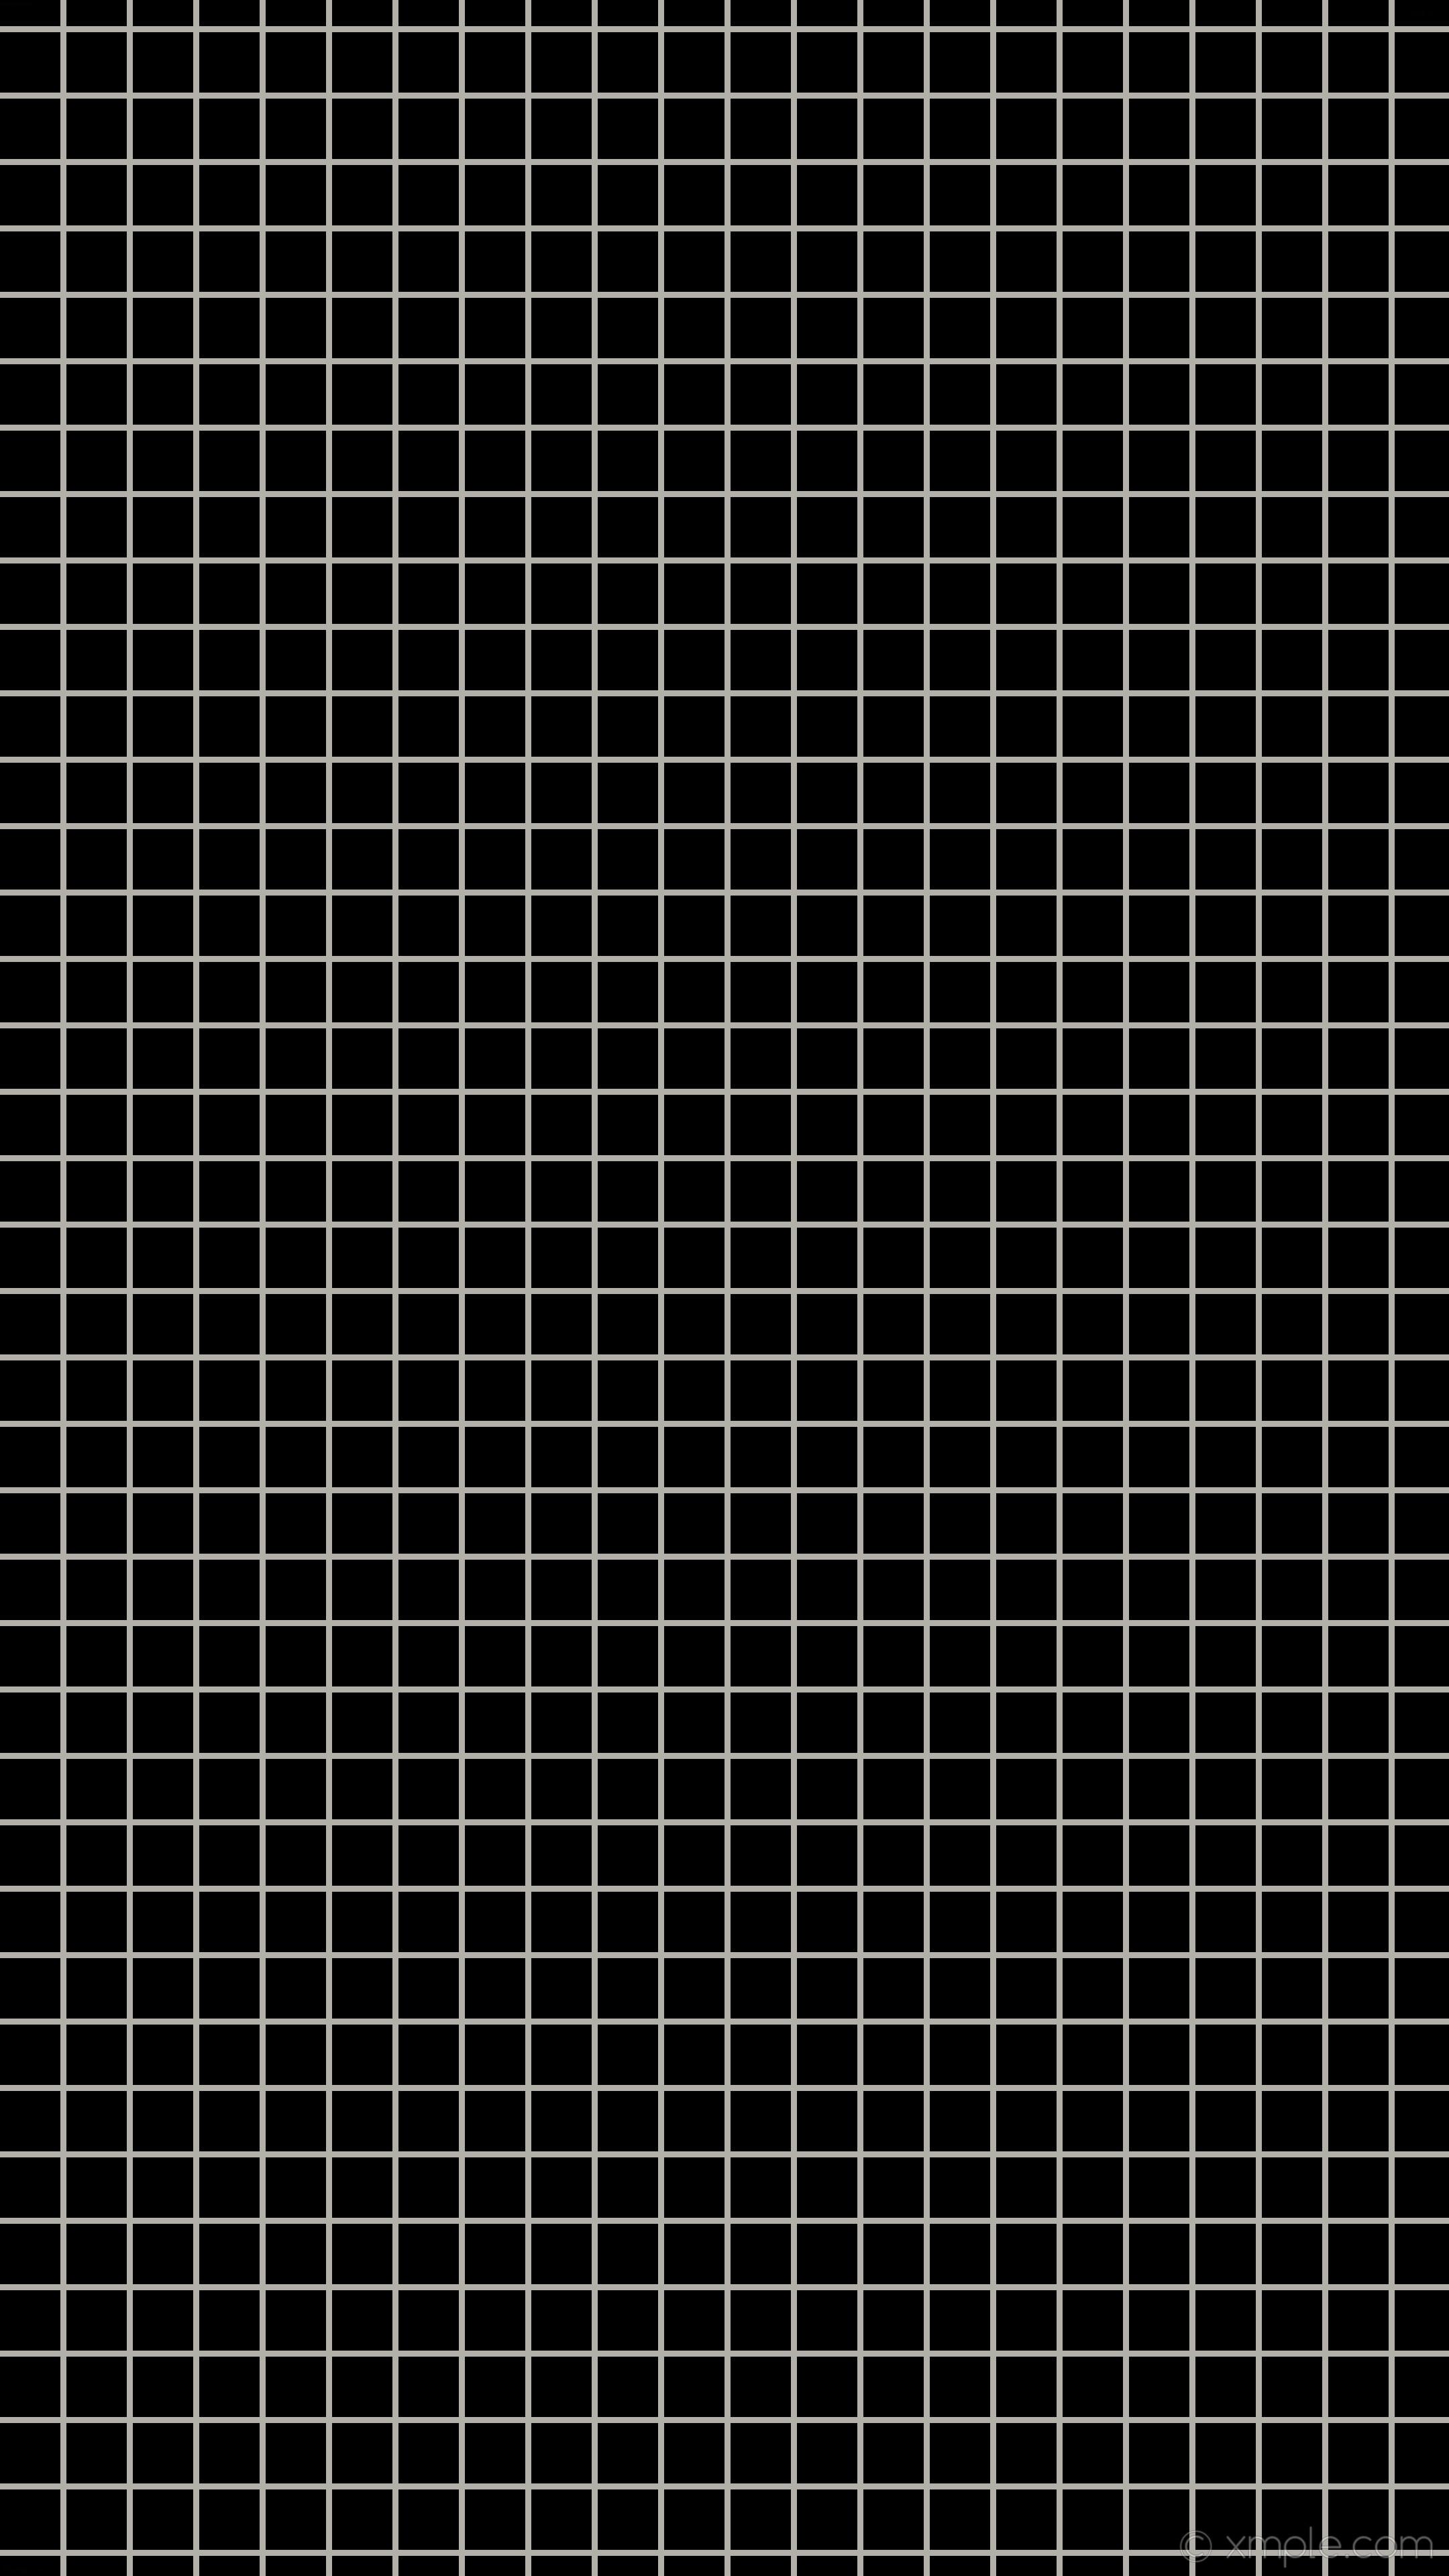 Black and white squares pattern - Grid, black and white